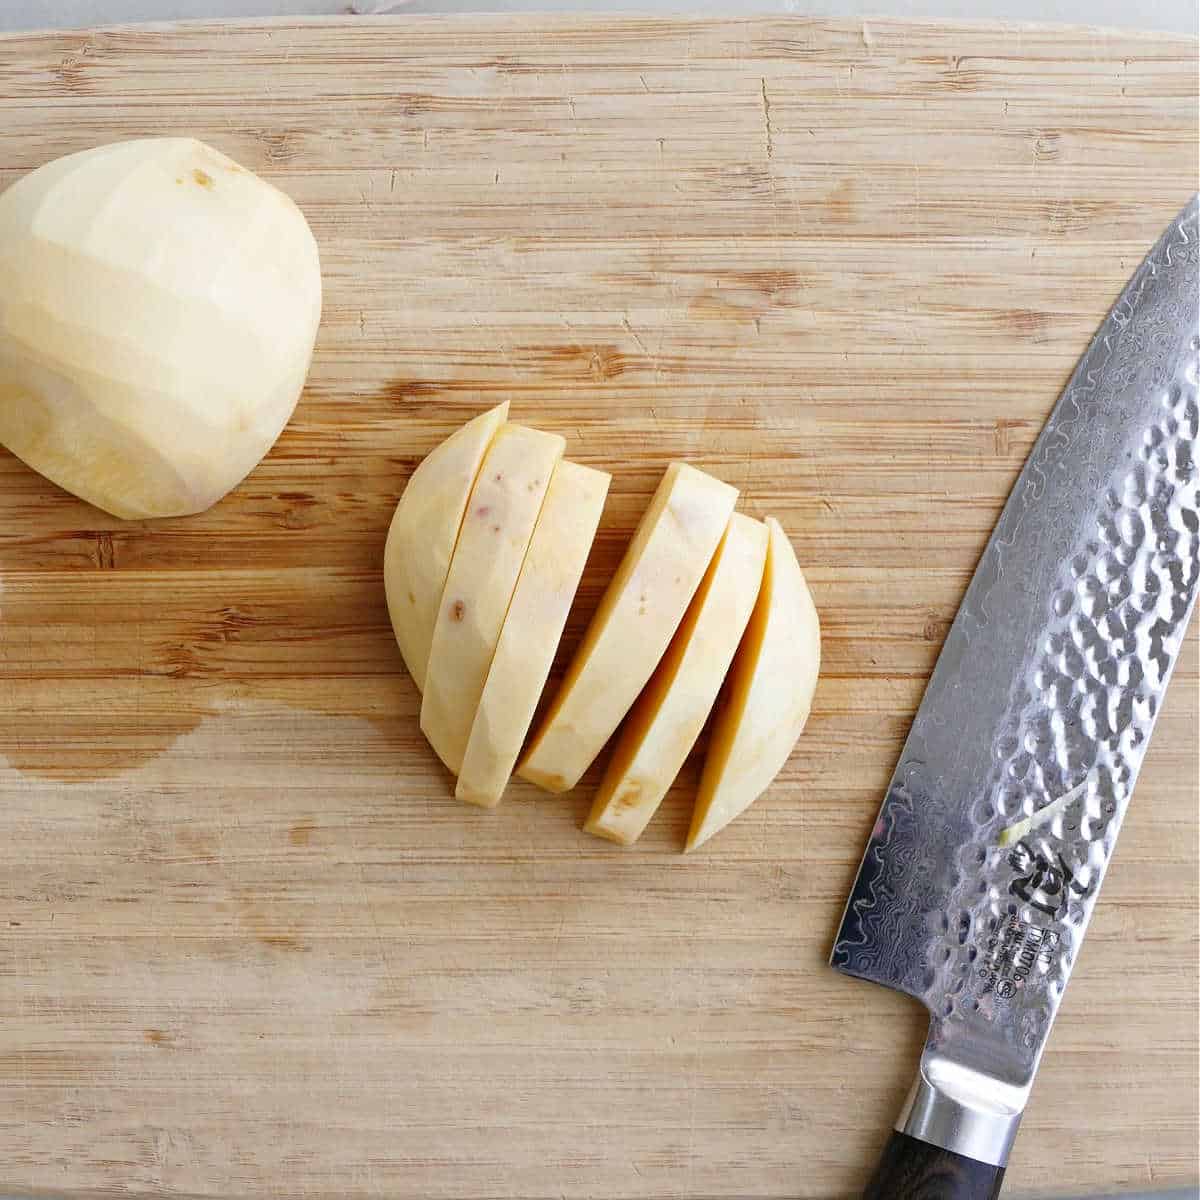 rutabaga cut into slices with a knife on a bamboo cutting board